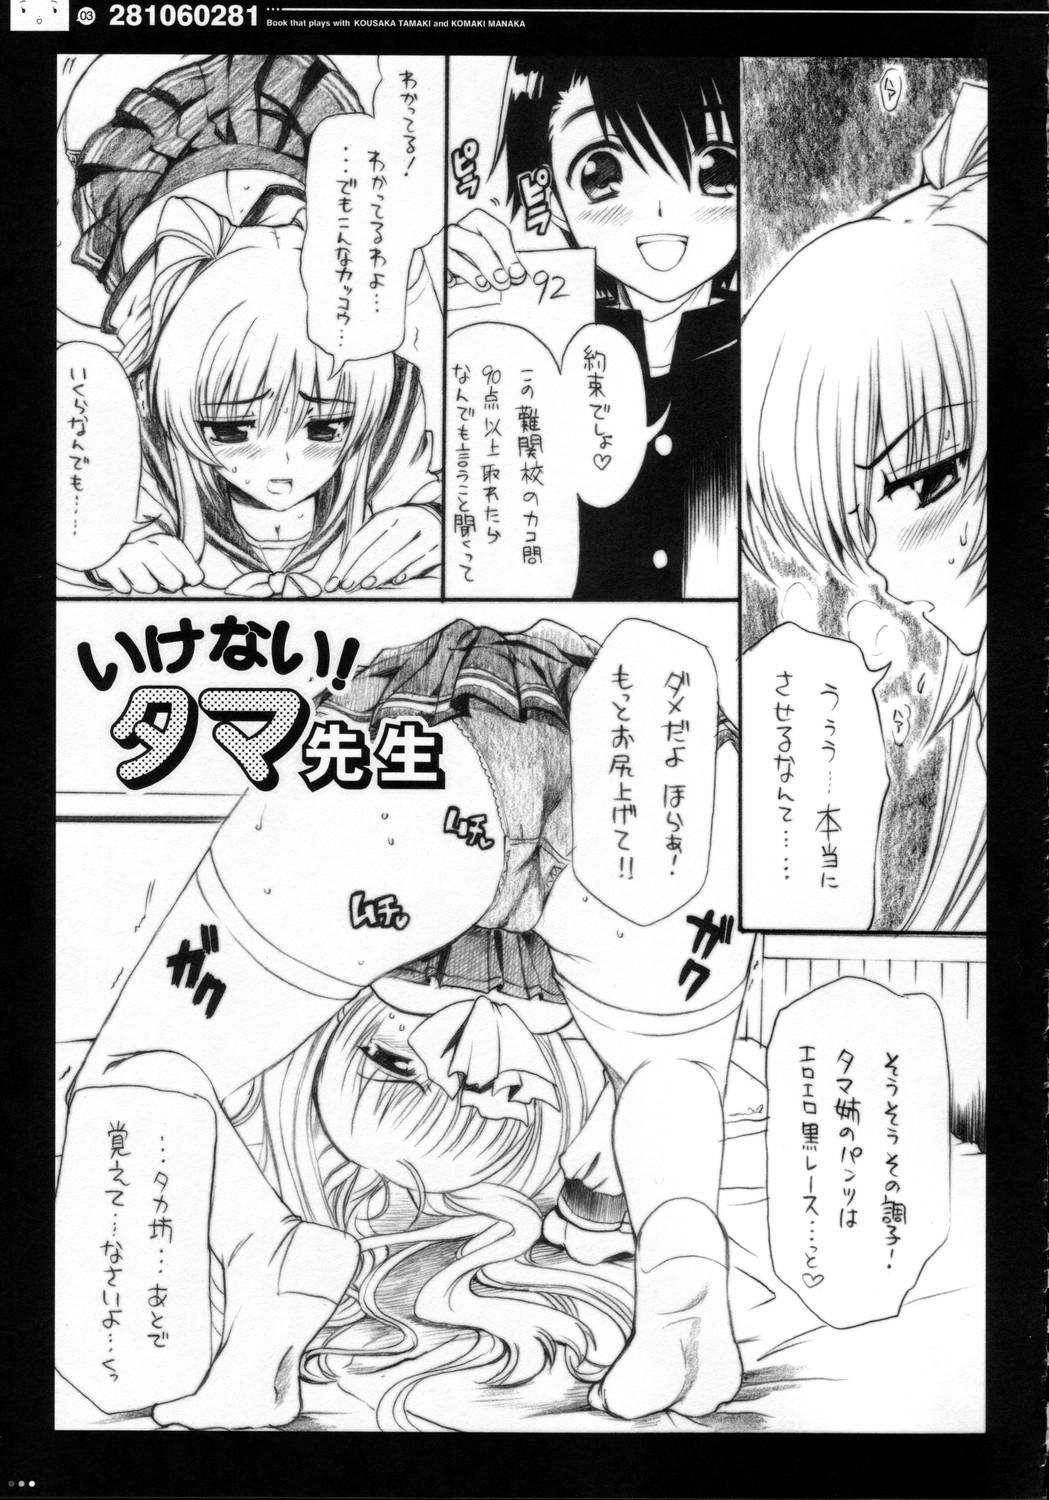 Weird (C69) [QP:flapper (Pimeco, Tometa)] QPchick10a Leaf-SIDE -Re:Re:CHERRY- (ToHeart 2) - Toheart2 Cumming - Page 6